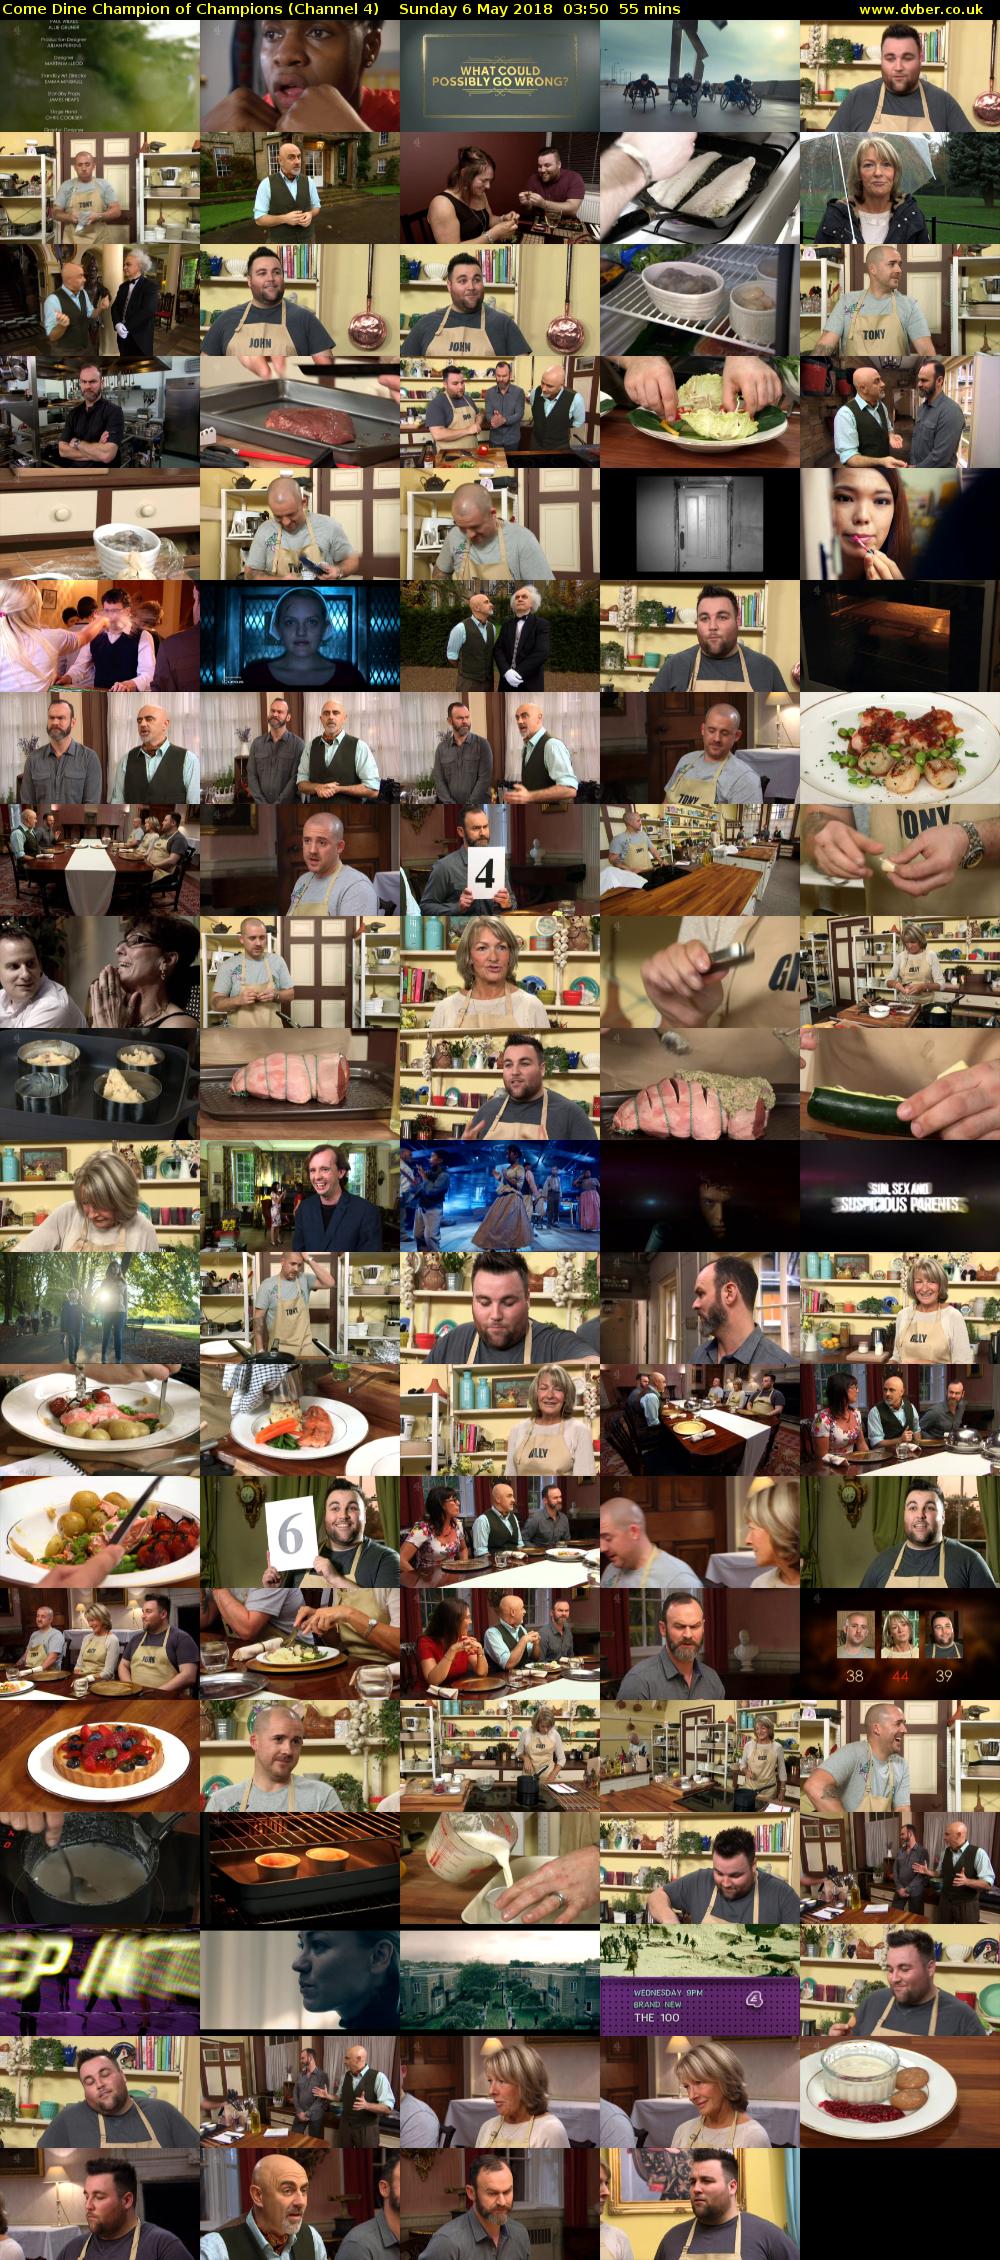 Come Dine Champion of Champions (Channel 4) Sunday 6 May 2018 03:50 - 04:45